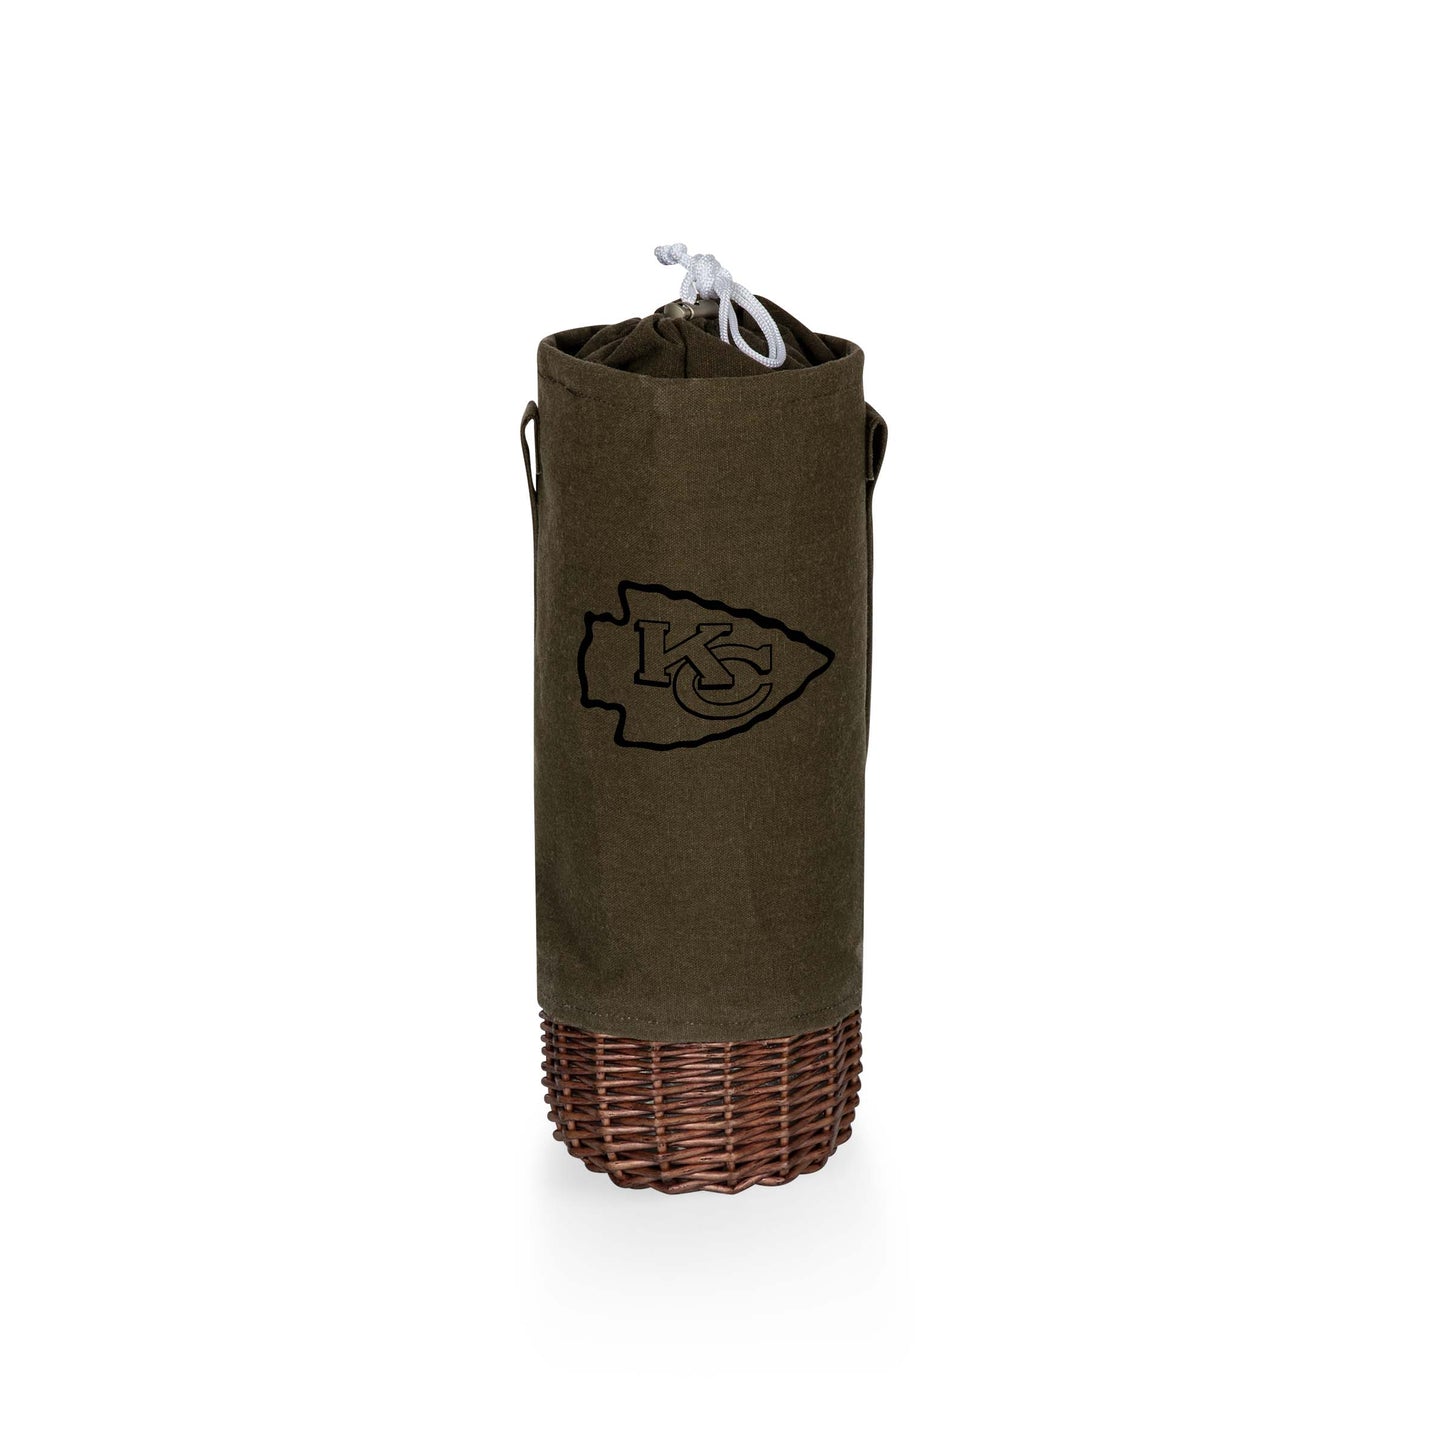 Kansas City Chiefs - Malbec Insulated Canvas and Willow Wine Bottle Basket